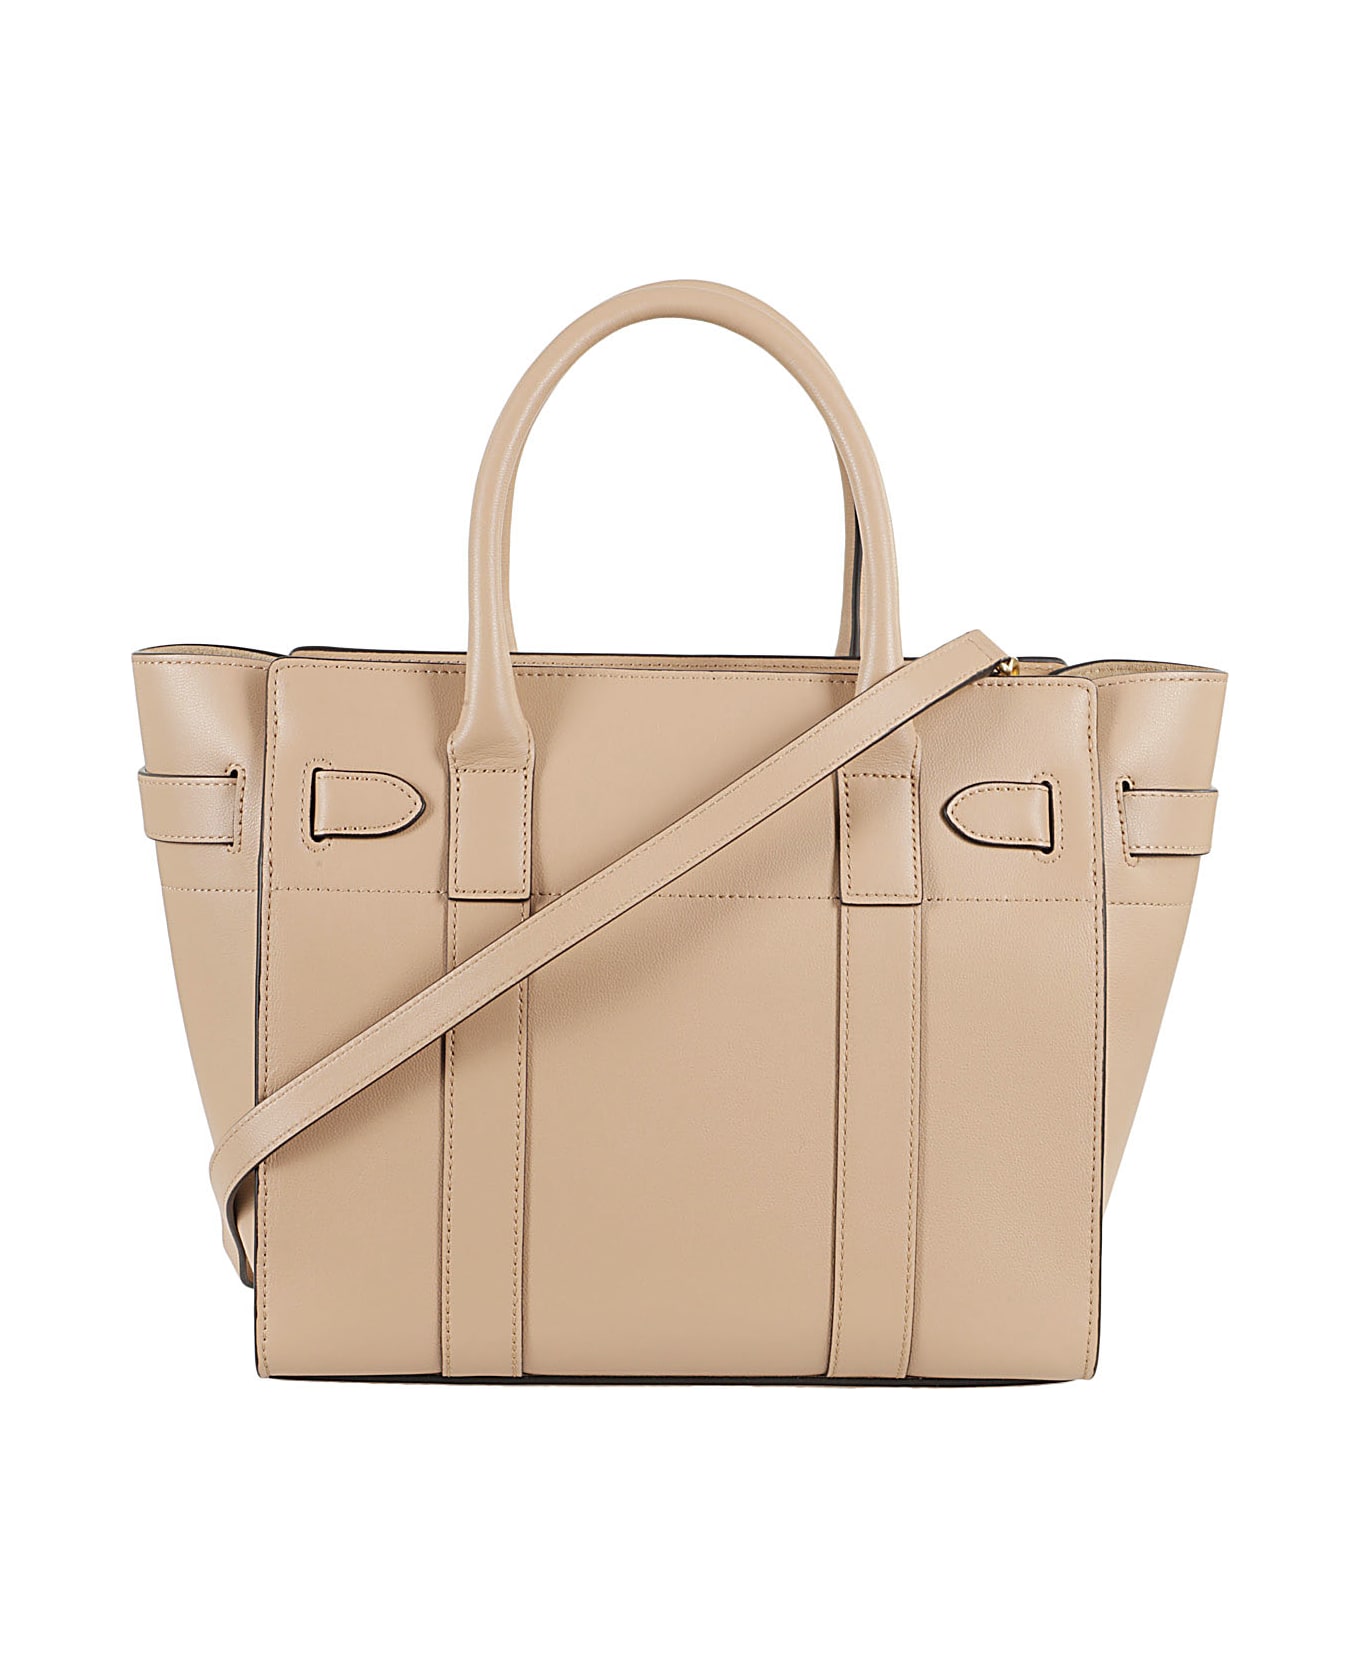 Mulberry Small Zipped Bayswater - Maple トートバッグ